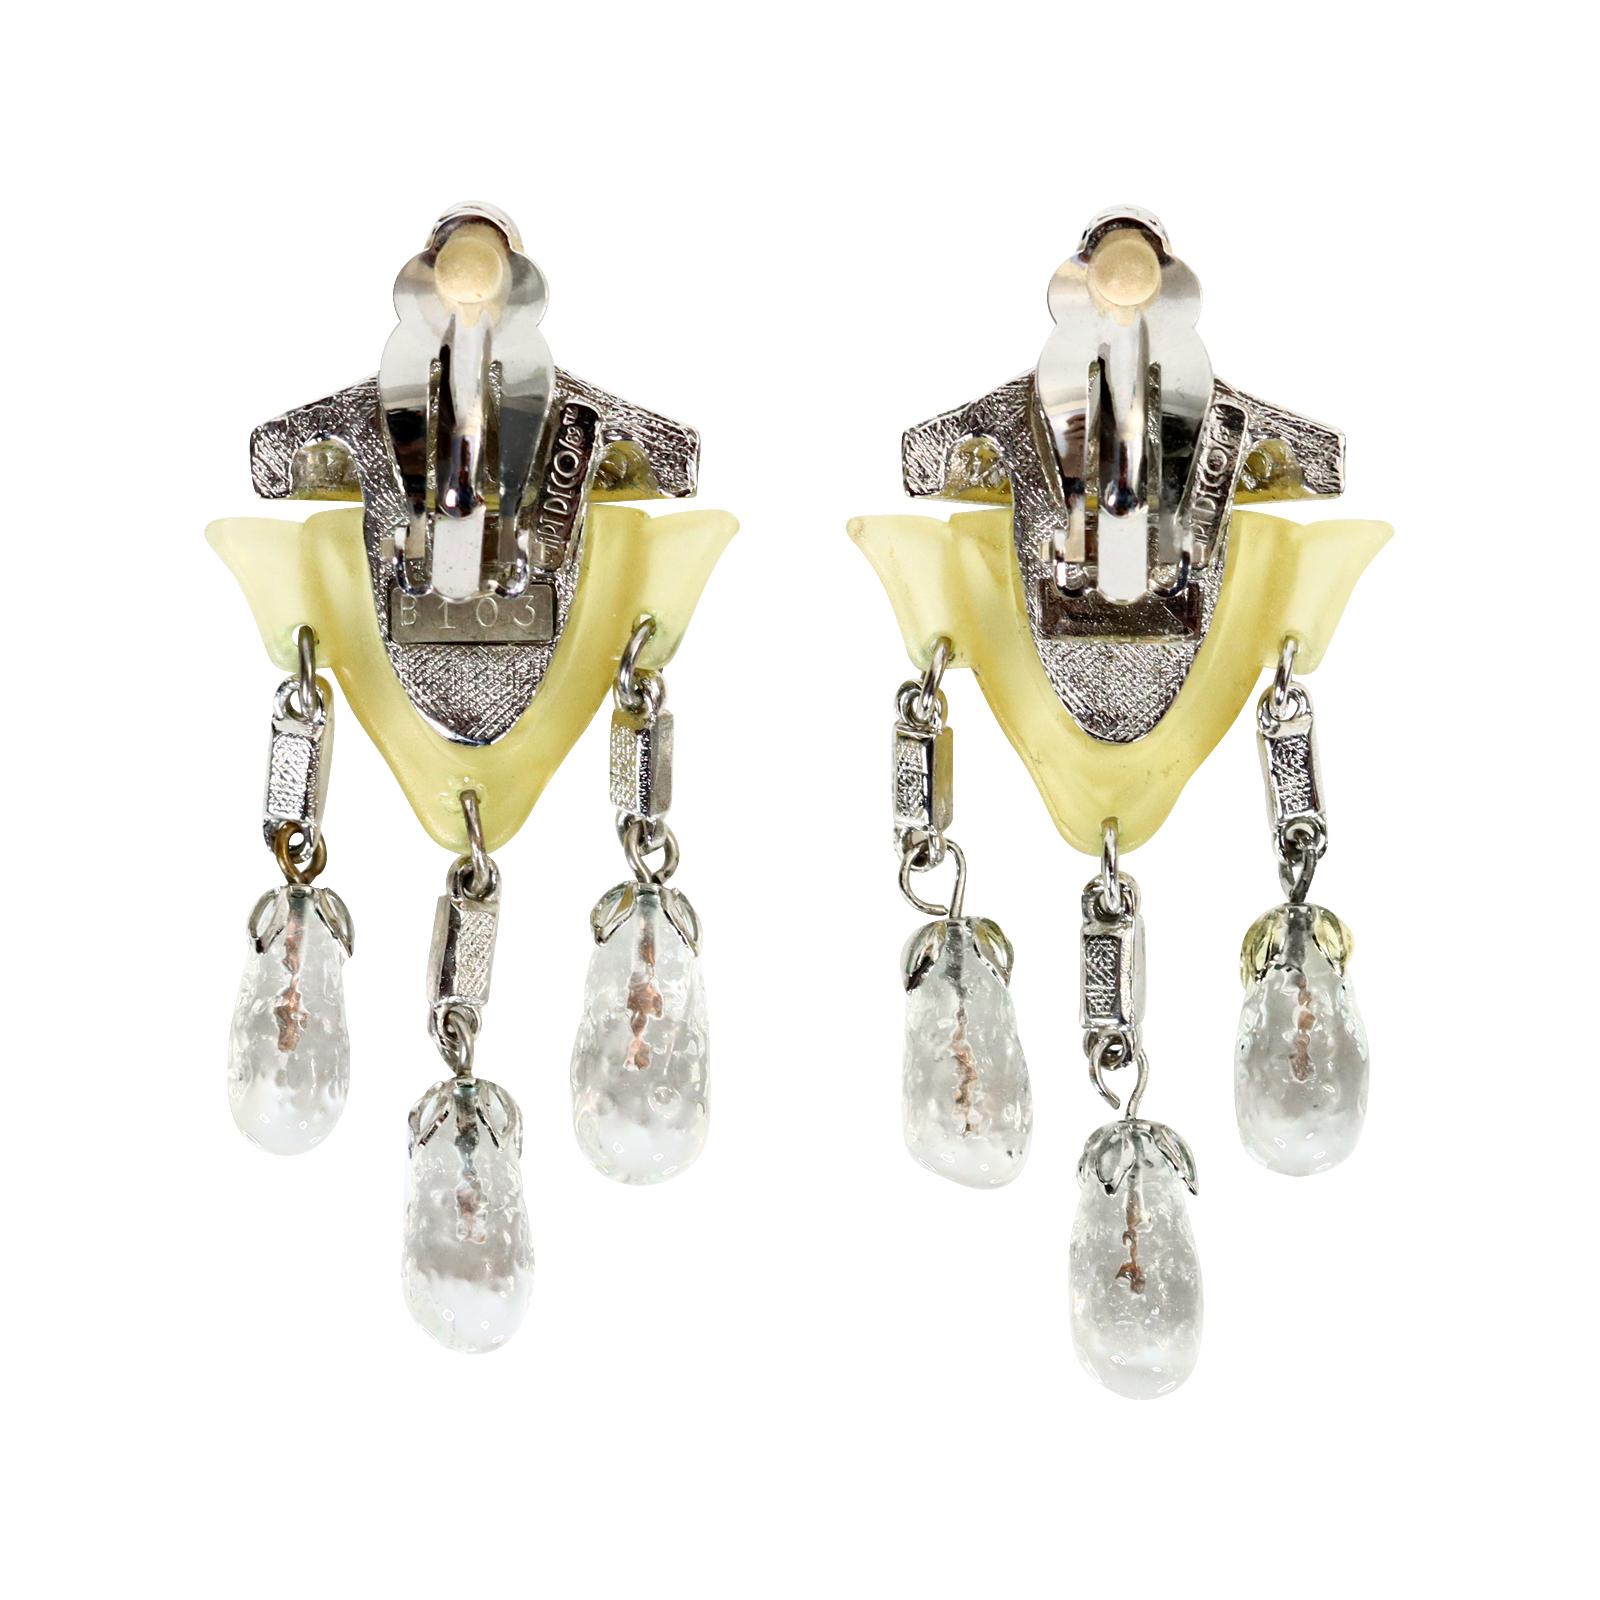 Vintage Art Deco Dangling Resin and Diamante Faux Emerald Earrings Circa 1980s For Sale 3